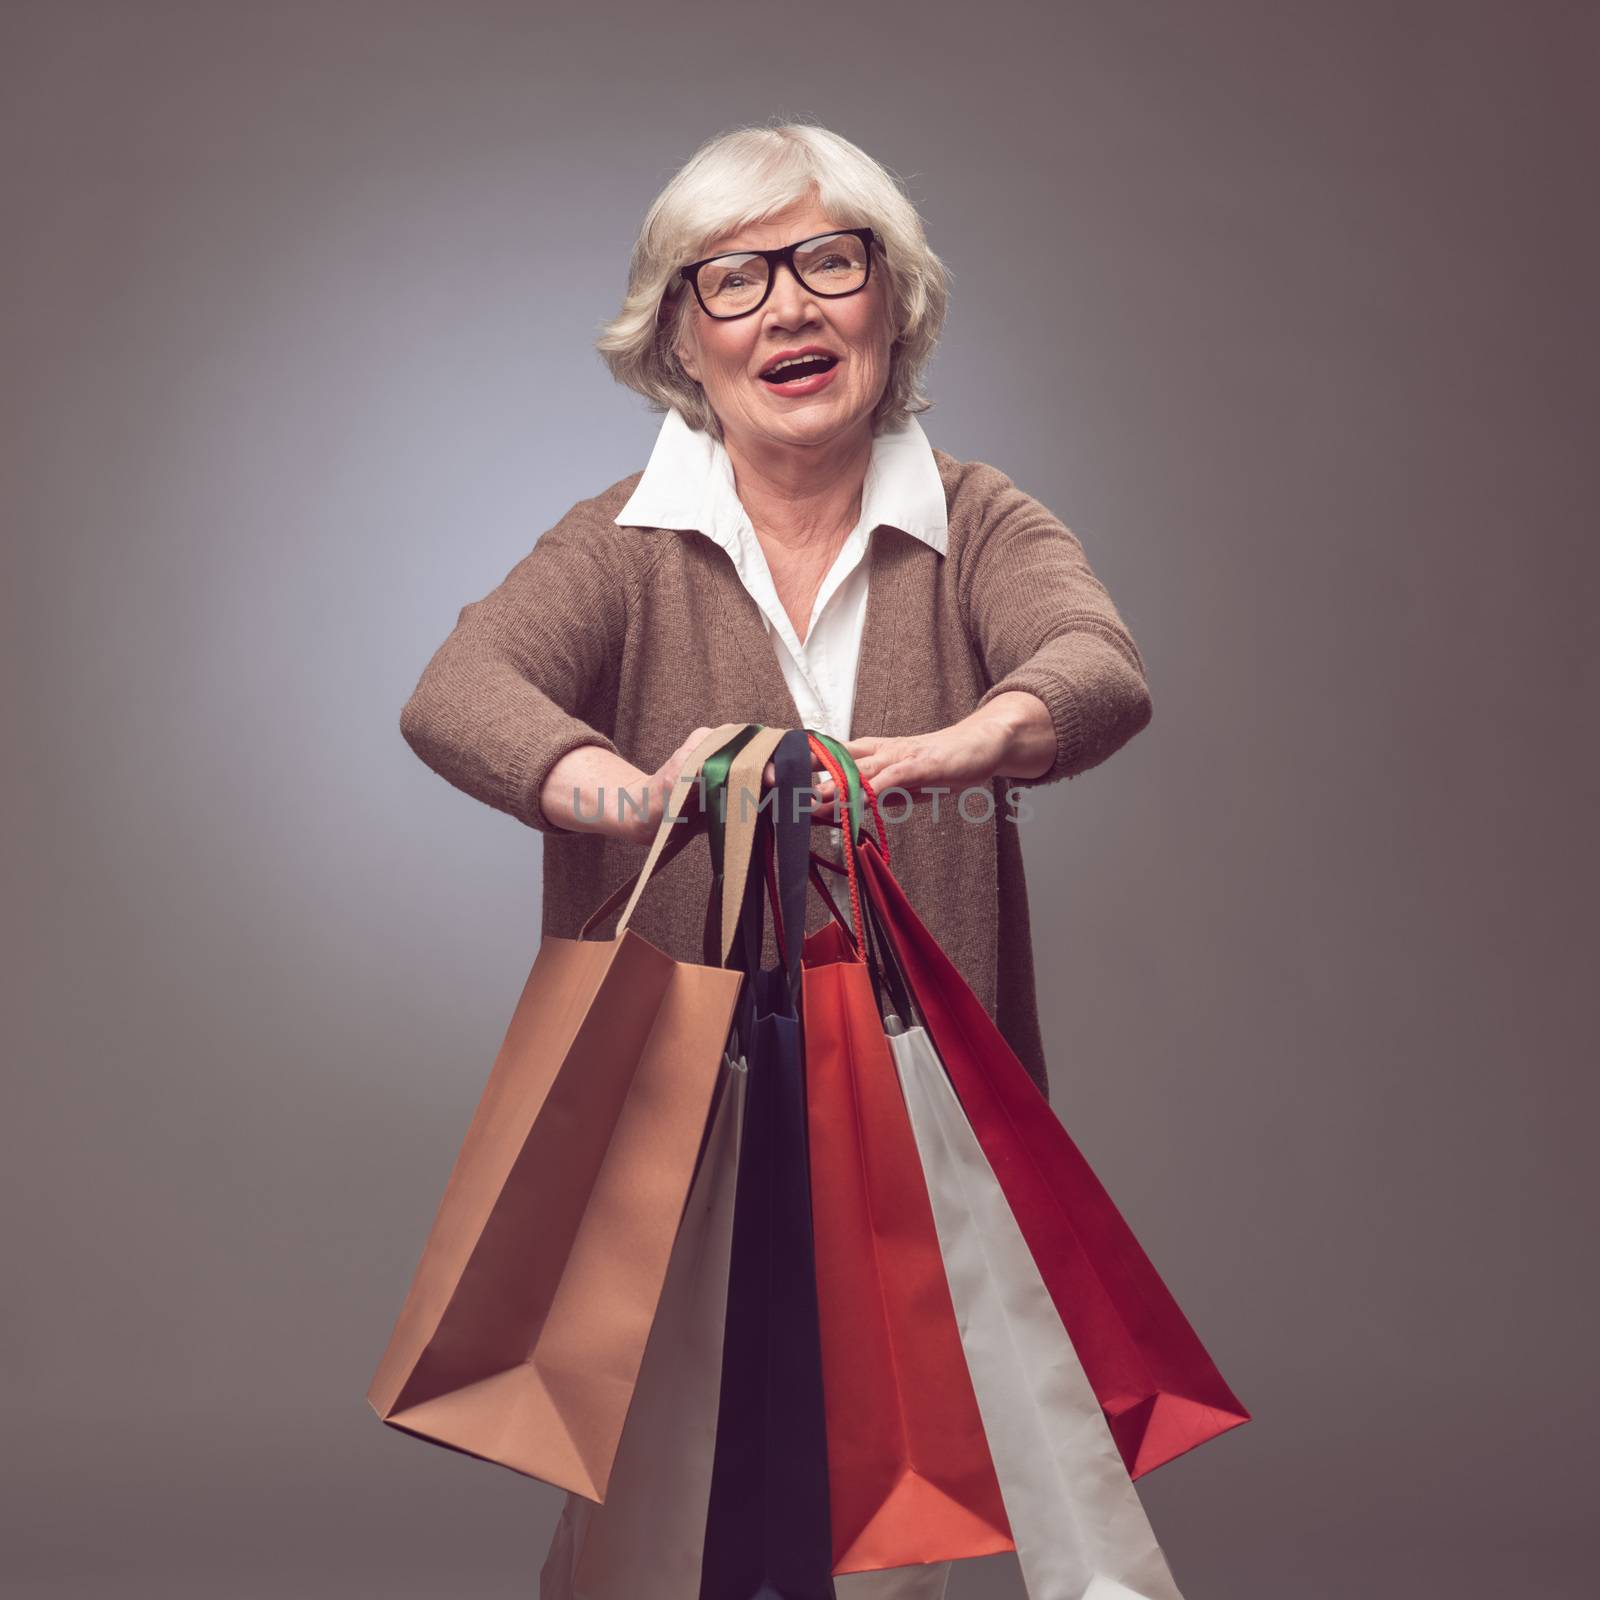 Shopper senior woman holding shopping bags possing happy smiling and excited